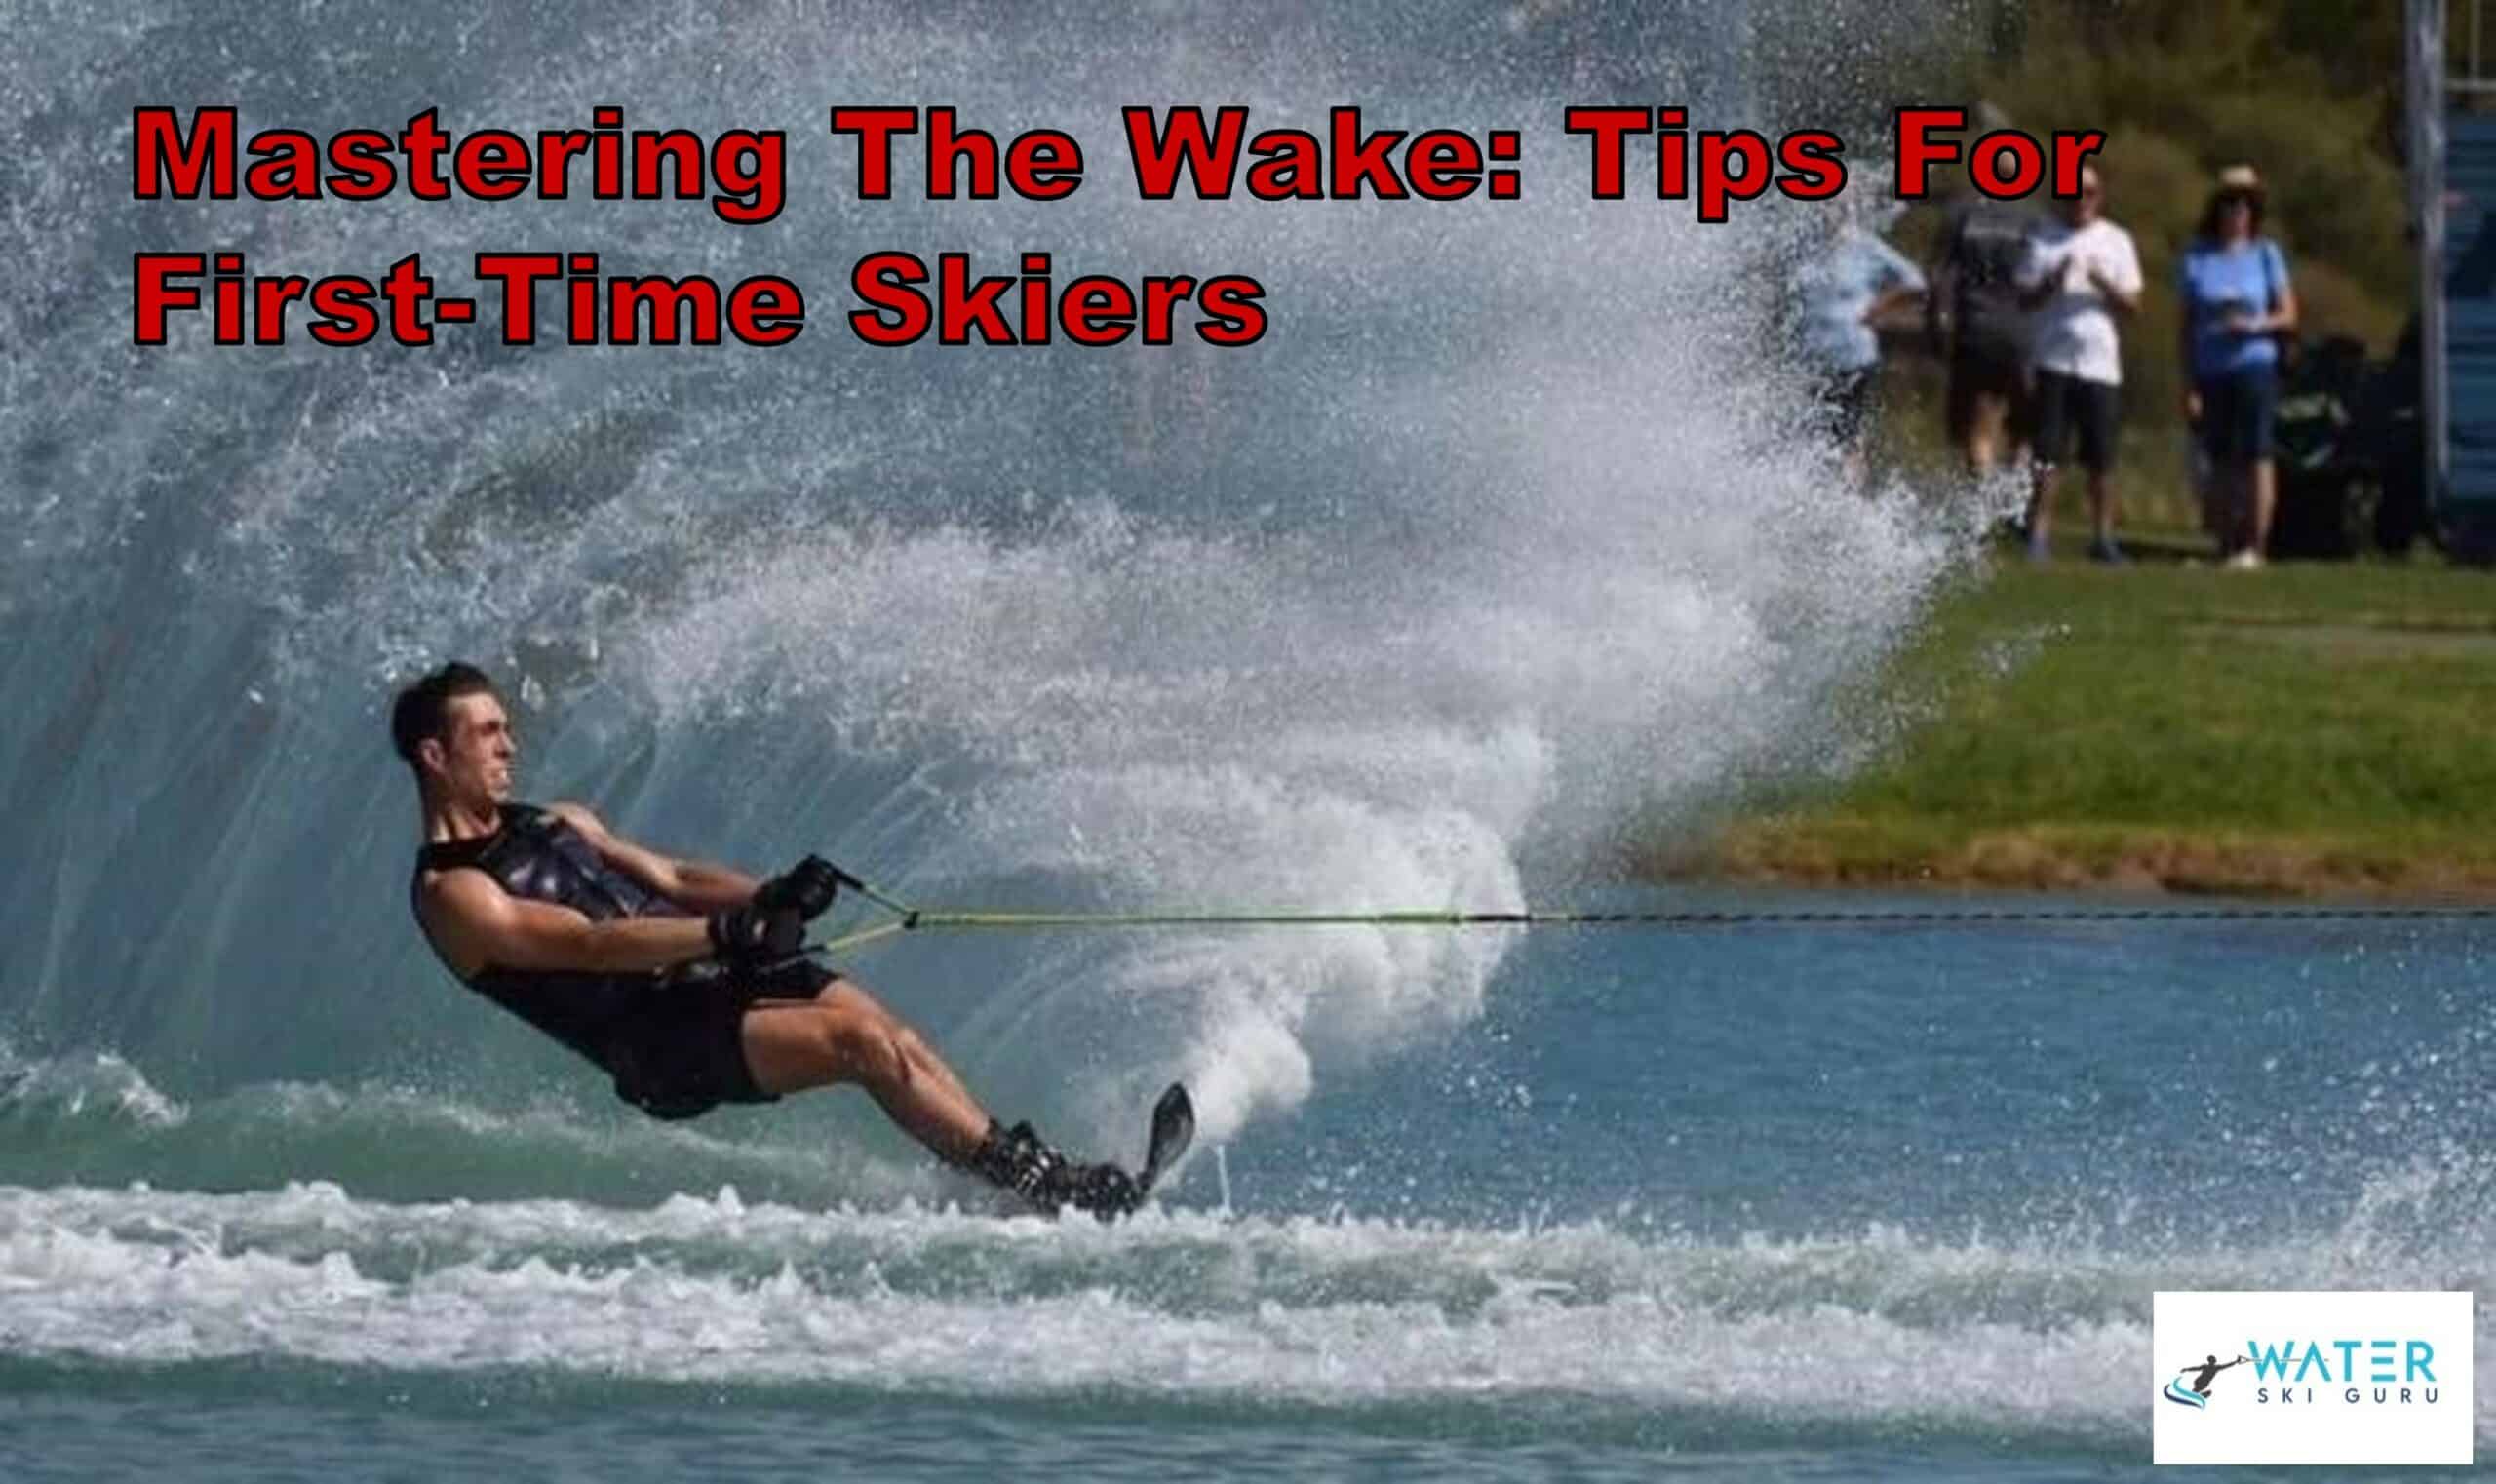 Mastering The Wake: Tips For First-Time Skiers